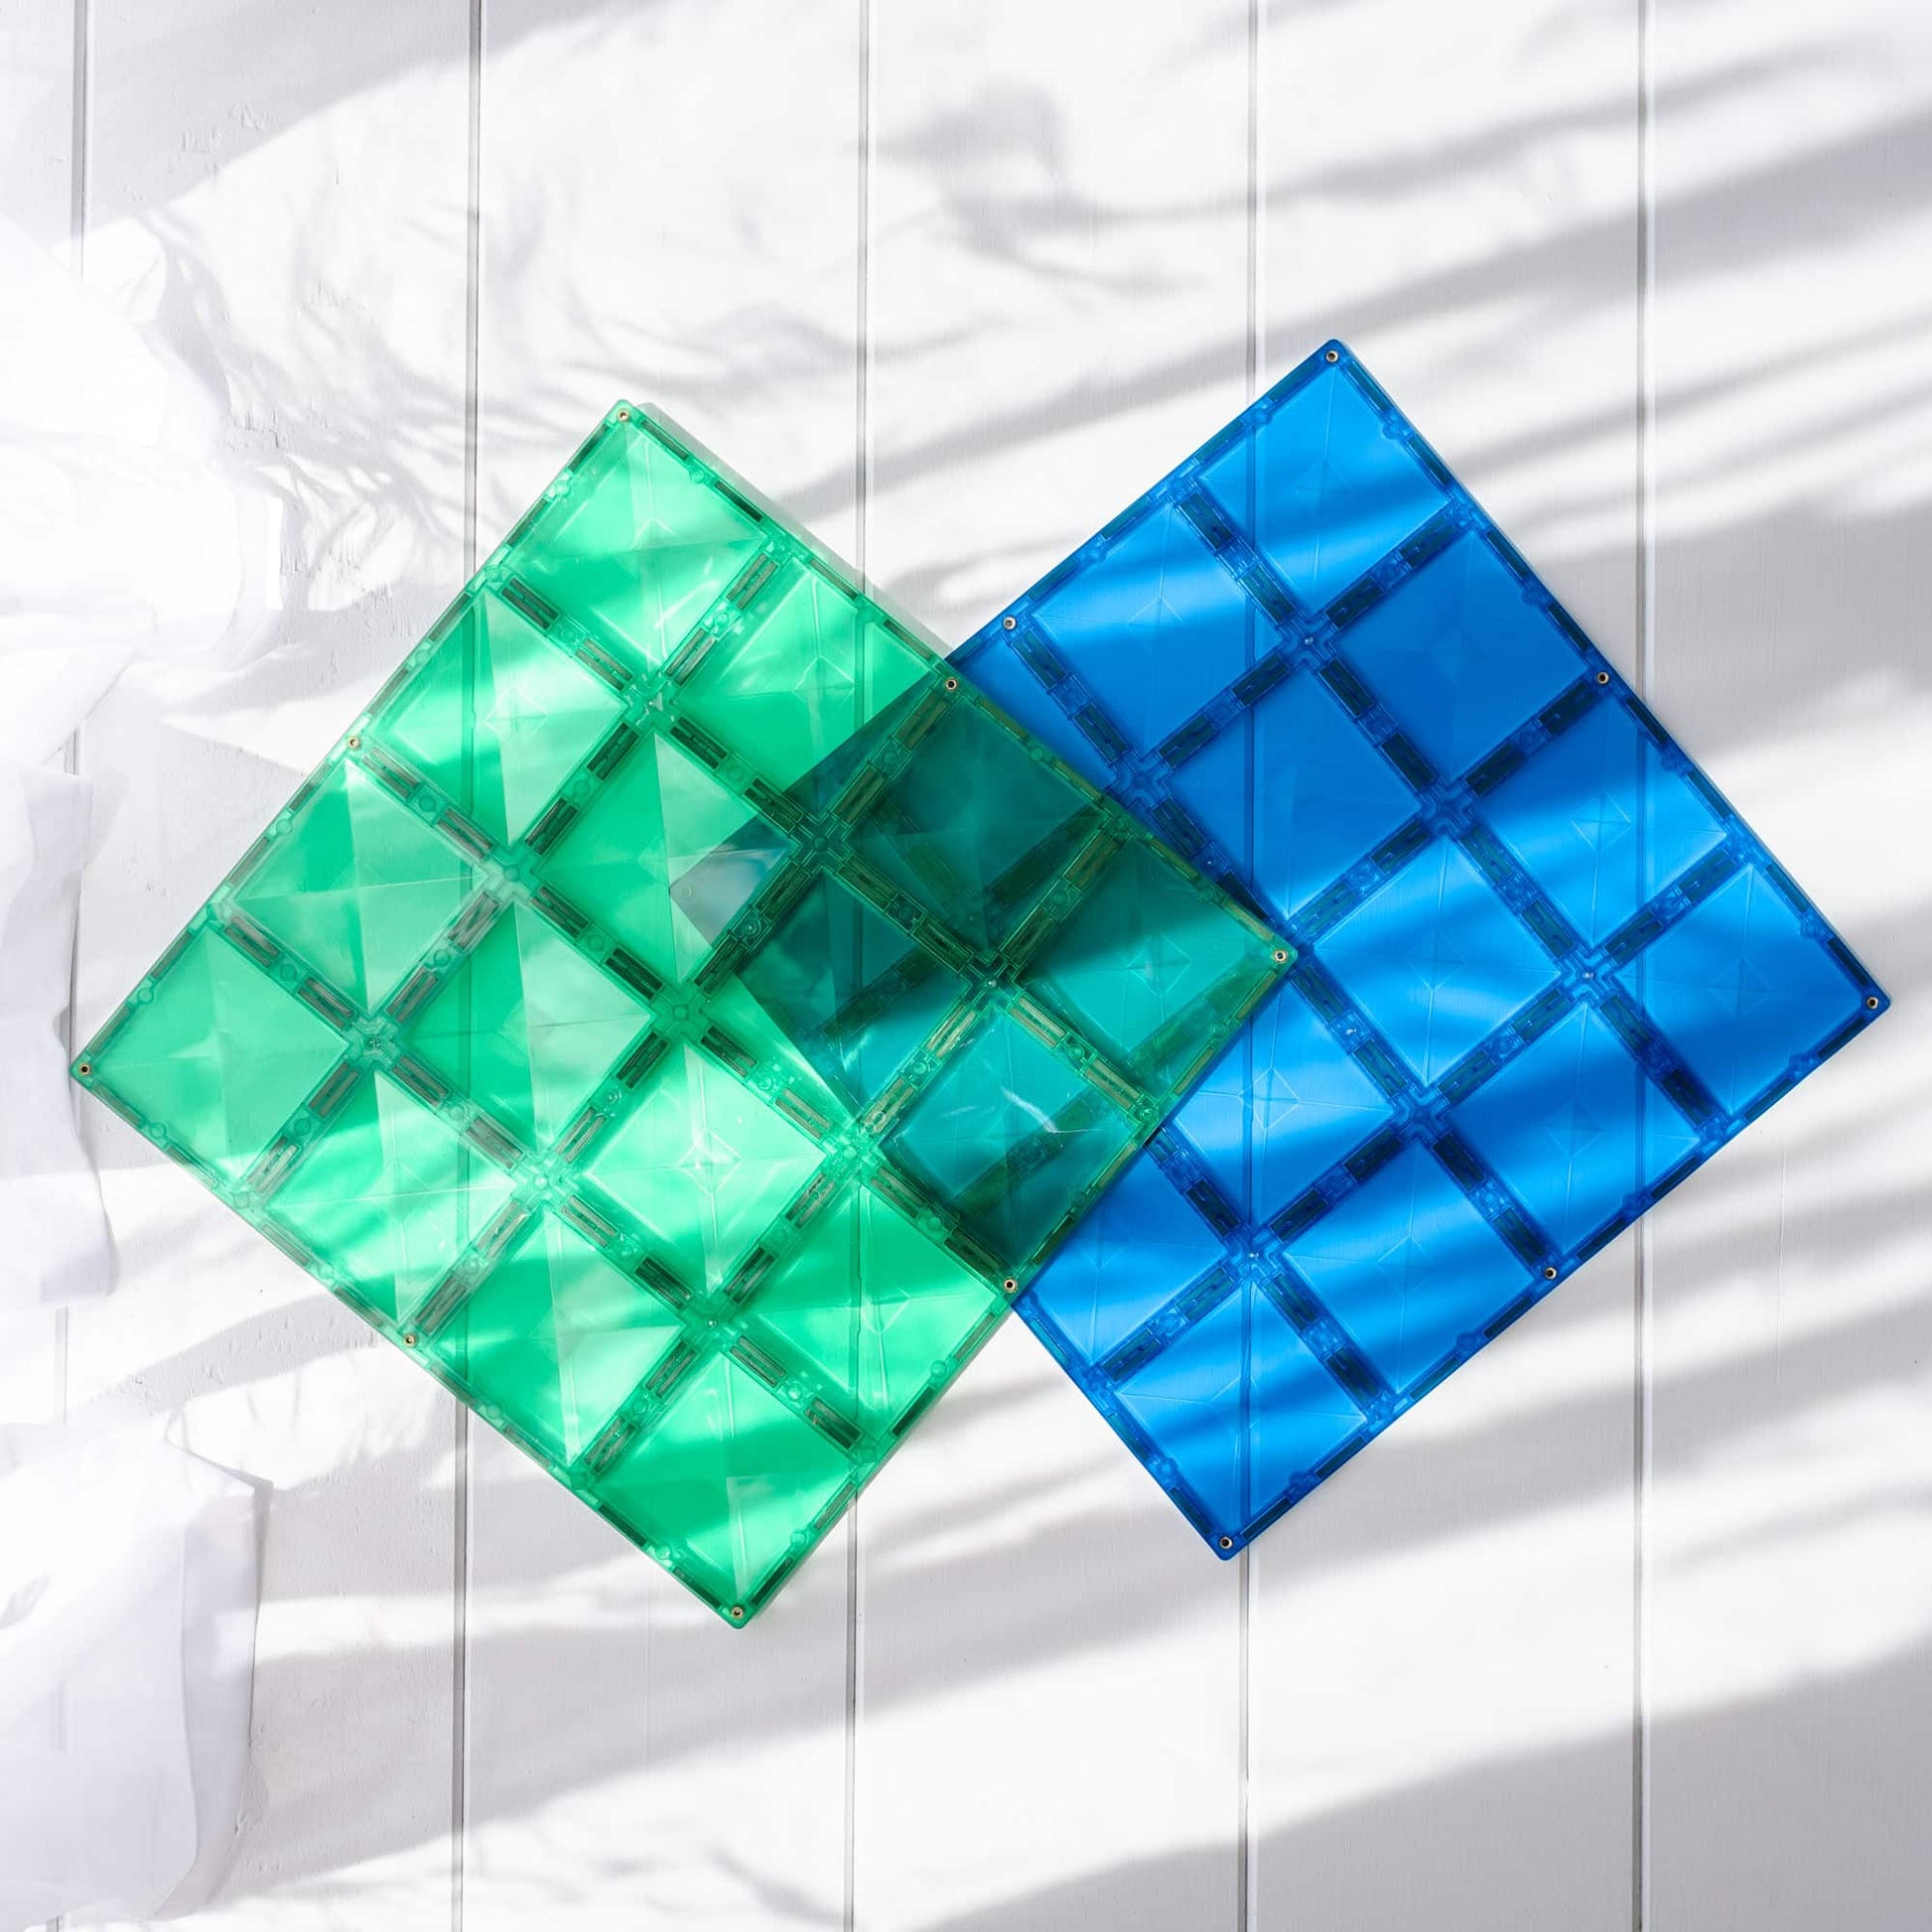 Connetix Tiles | 2 Piece Base Plate Pack - Blue & Green available at Bear & Moo